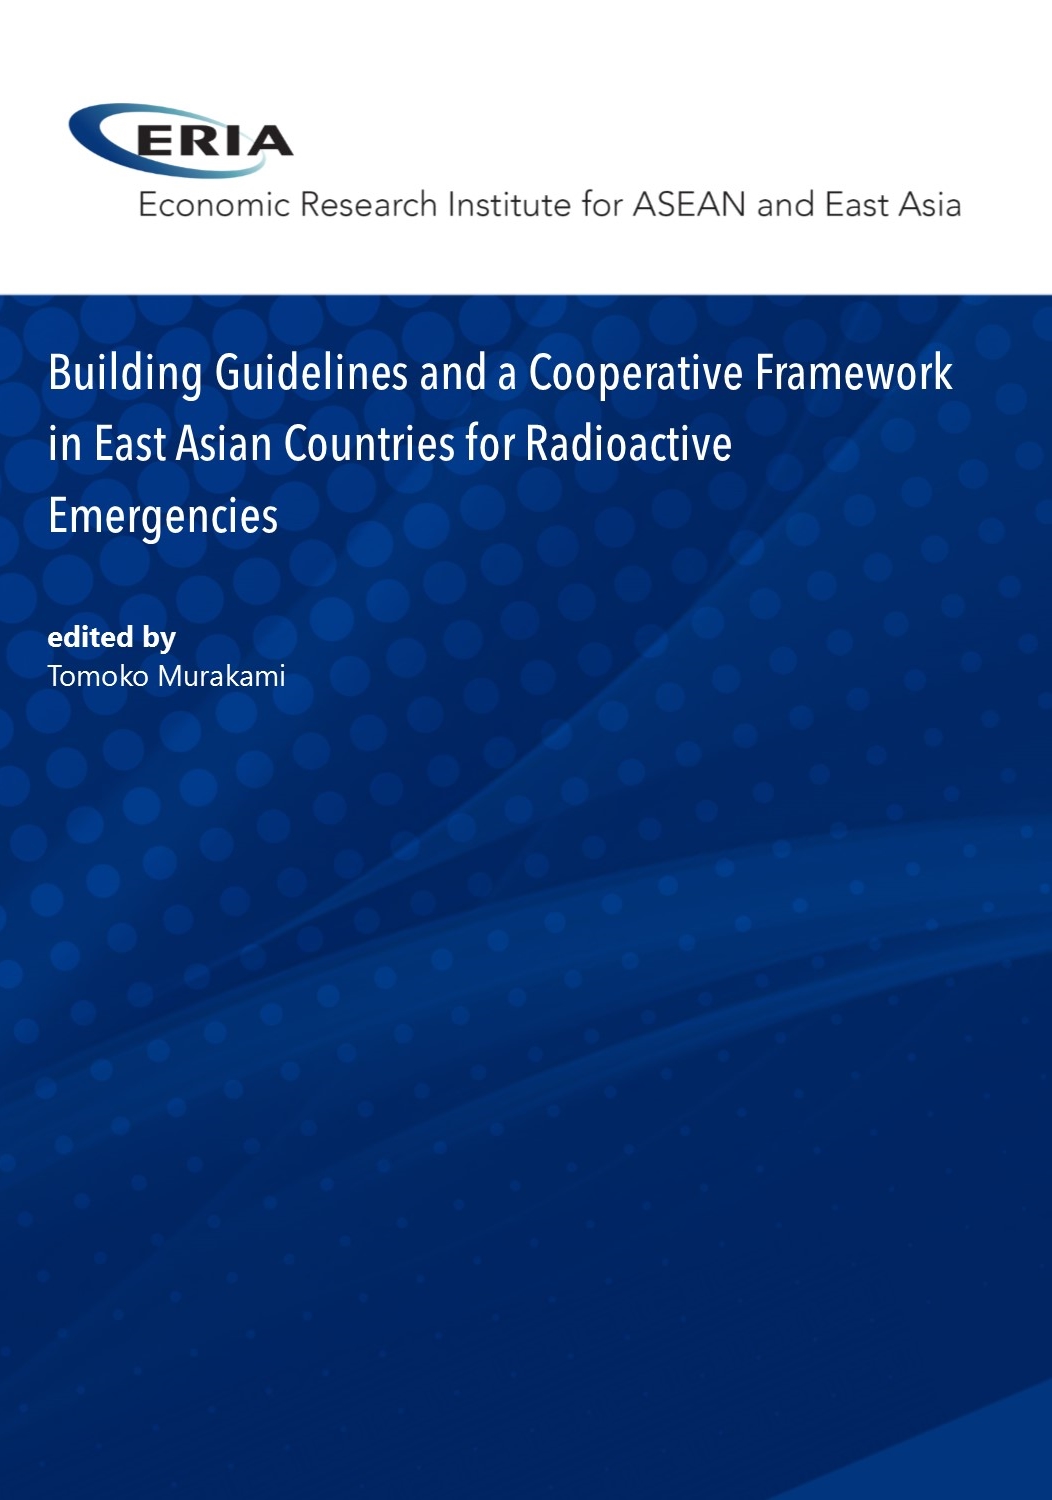 Building Guidelines and a Cooperative Framework in East Asian Countries for Radioactive Emergencies